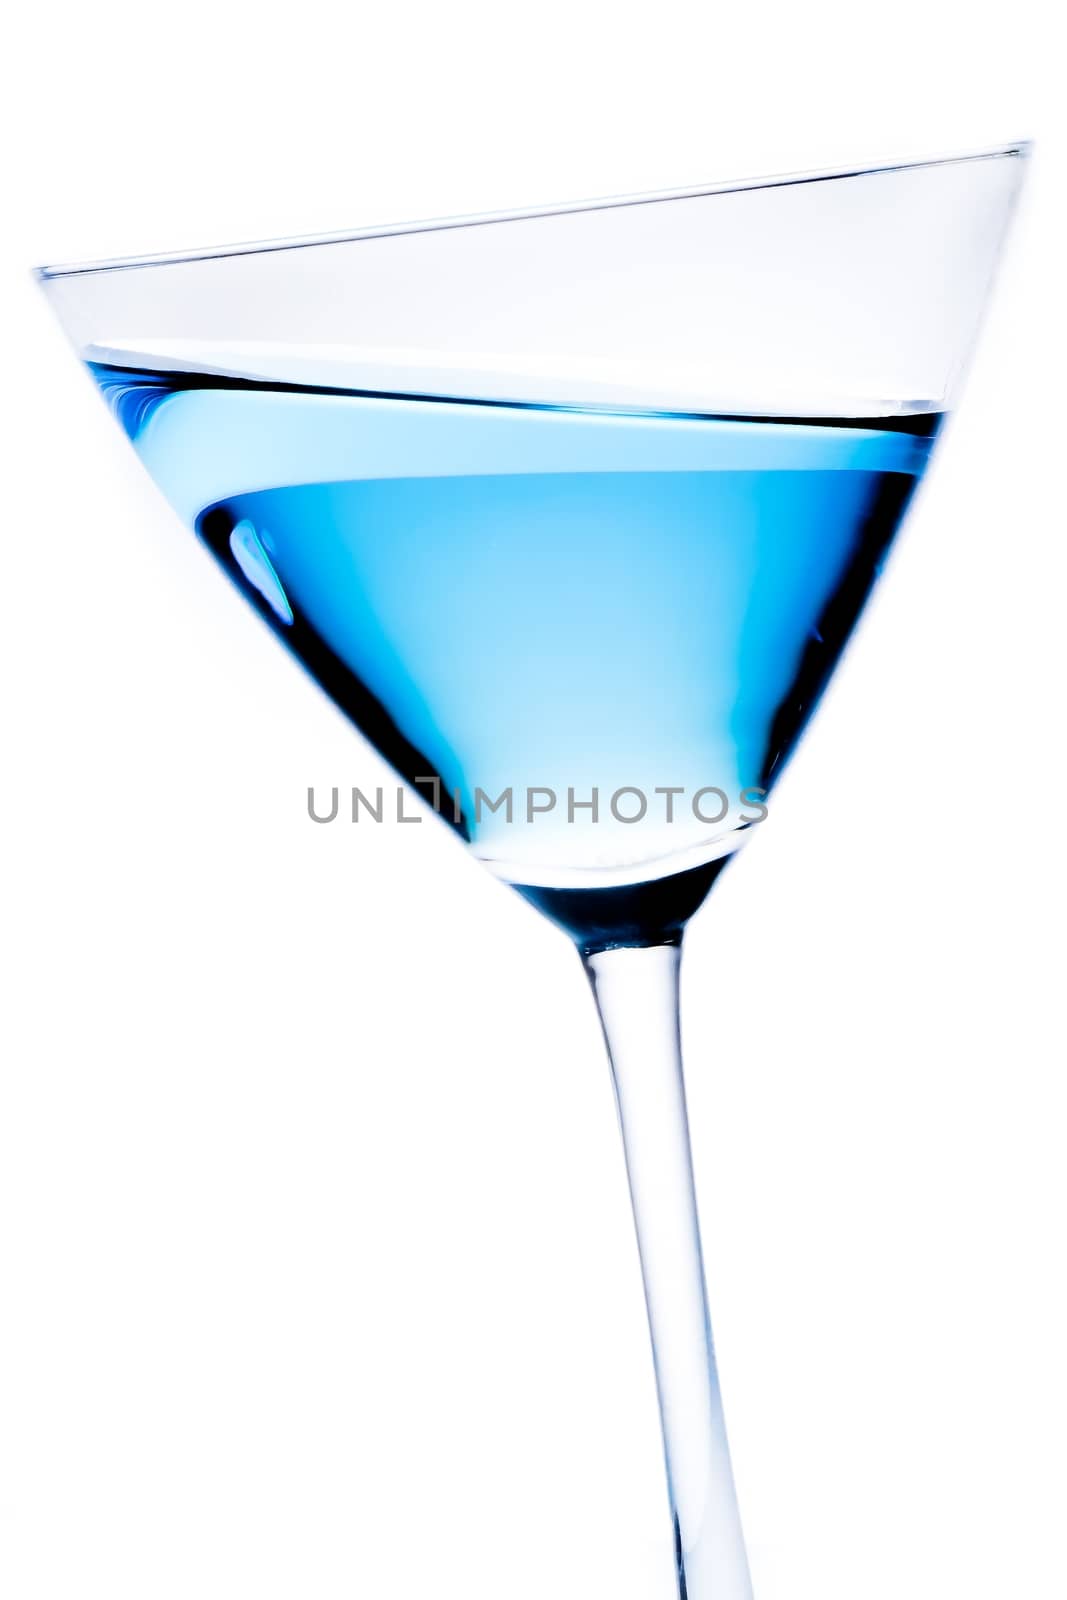 detail of blue cocktail tilted  by donfiore